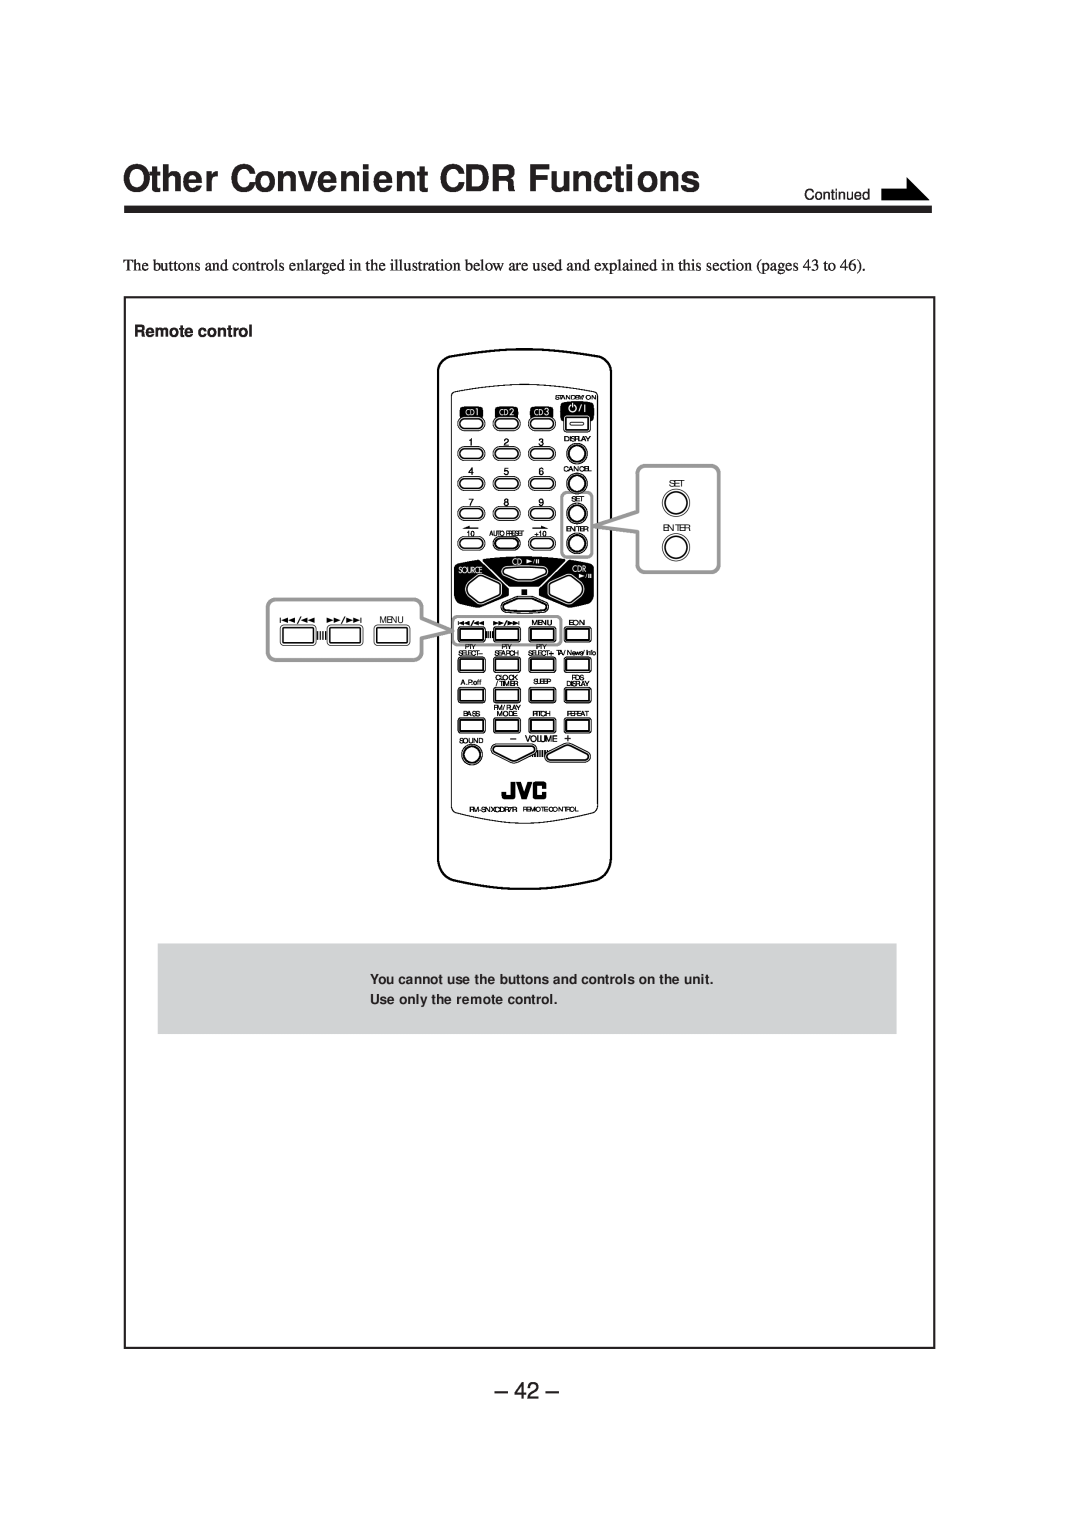 JVC CA-NXCDR7R, LVT0749-003A Other Convenient CDR Functions, Remote control, Use only the remote control, Continued, Menu 